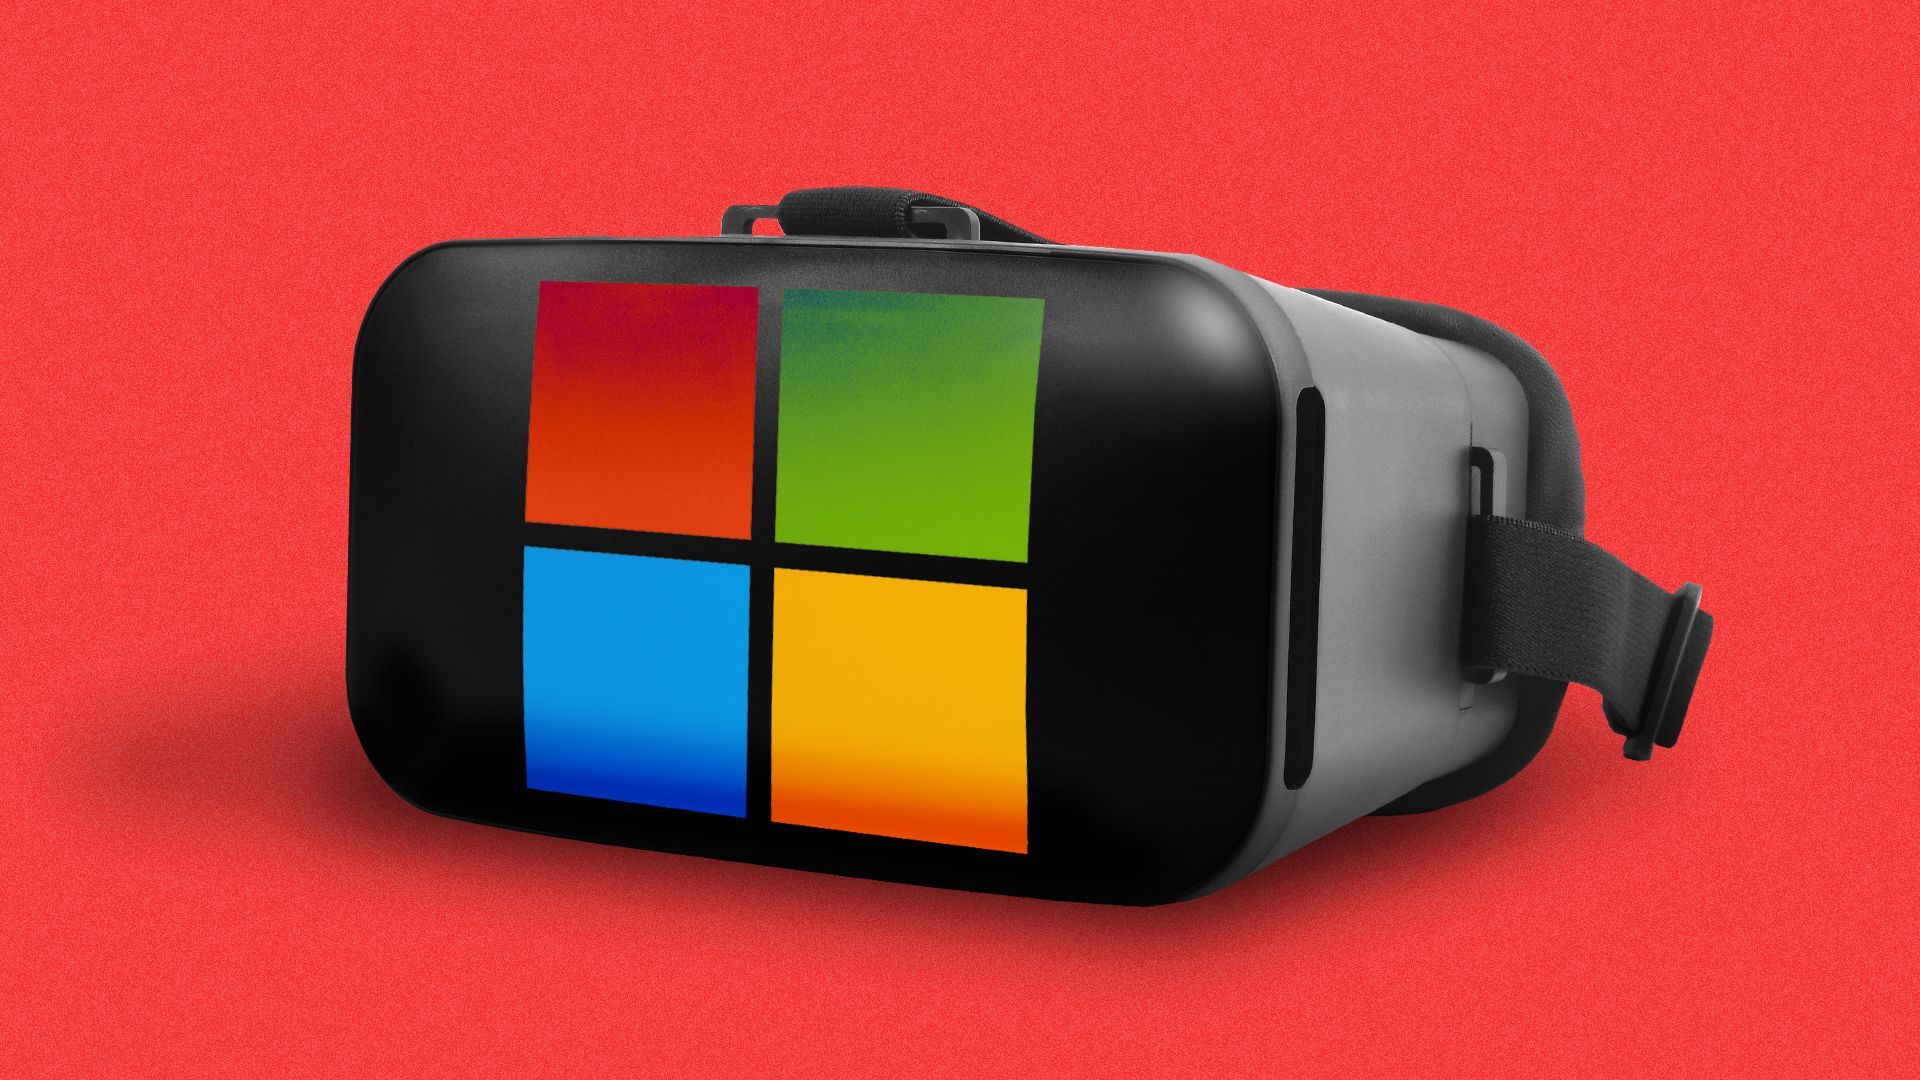 Illustration of a VR headset with the Microsoft logo reflected in the lens